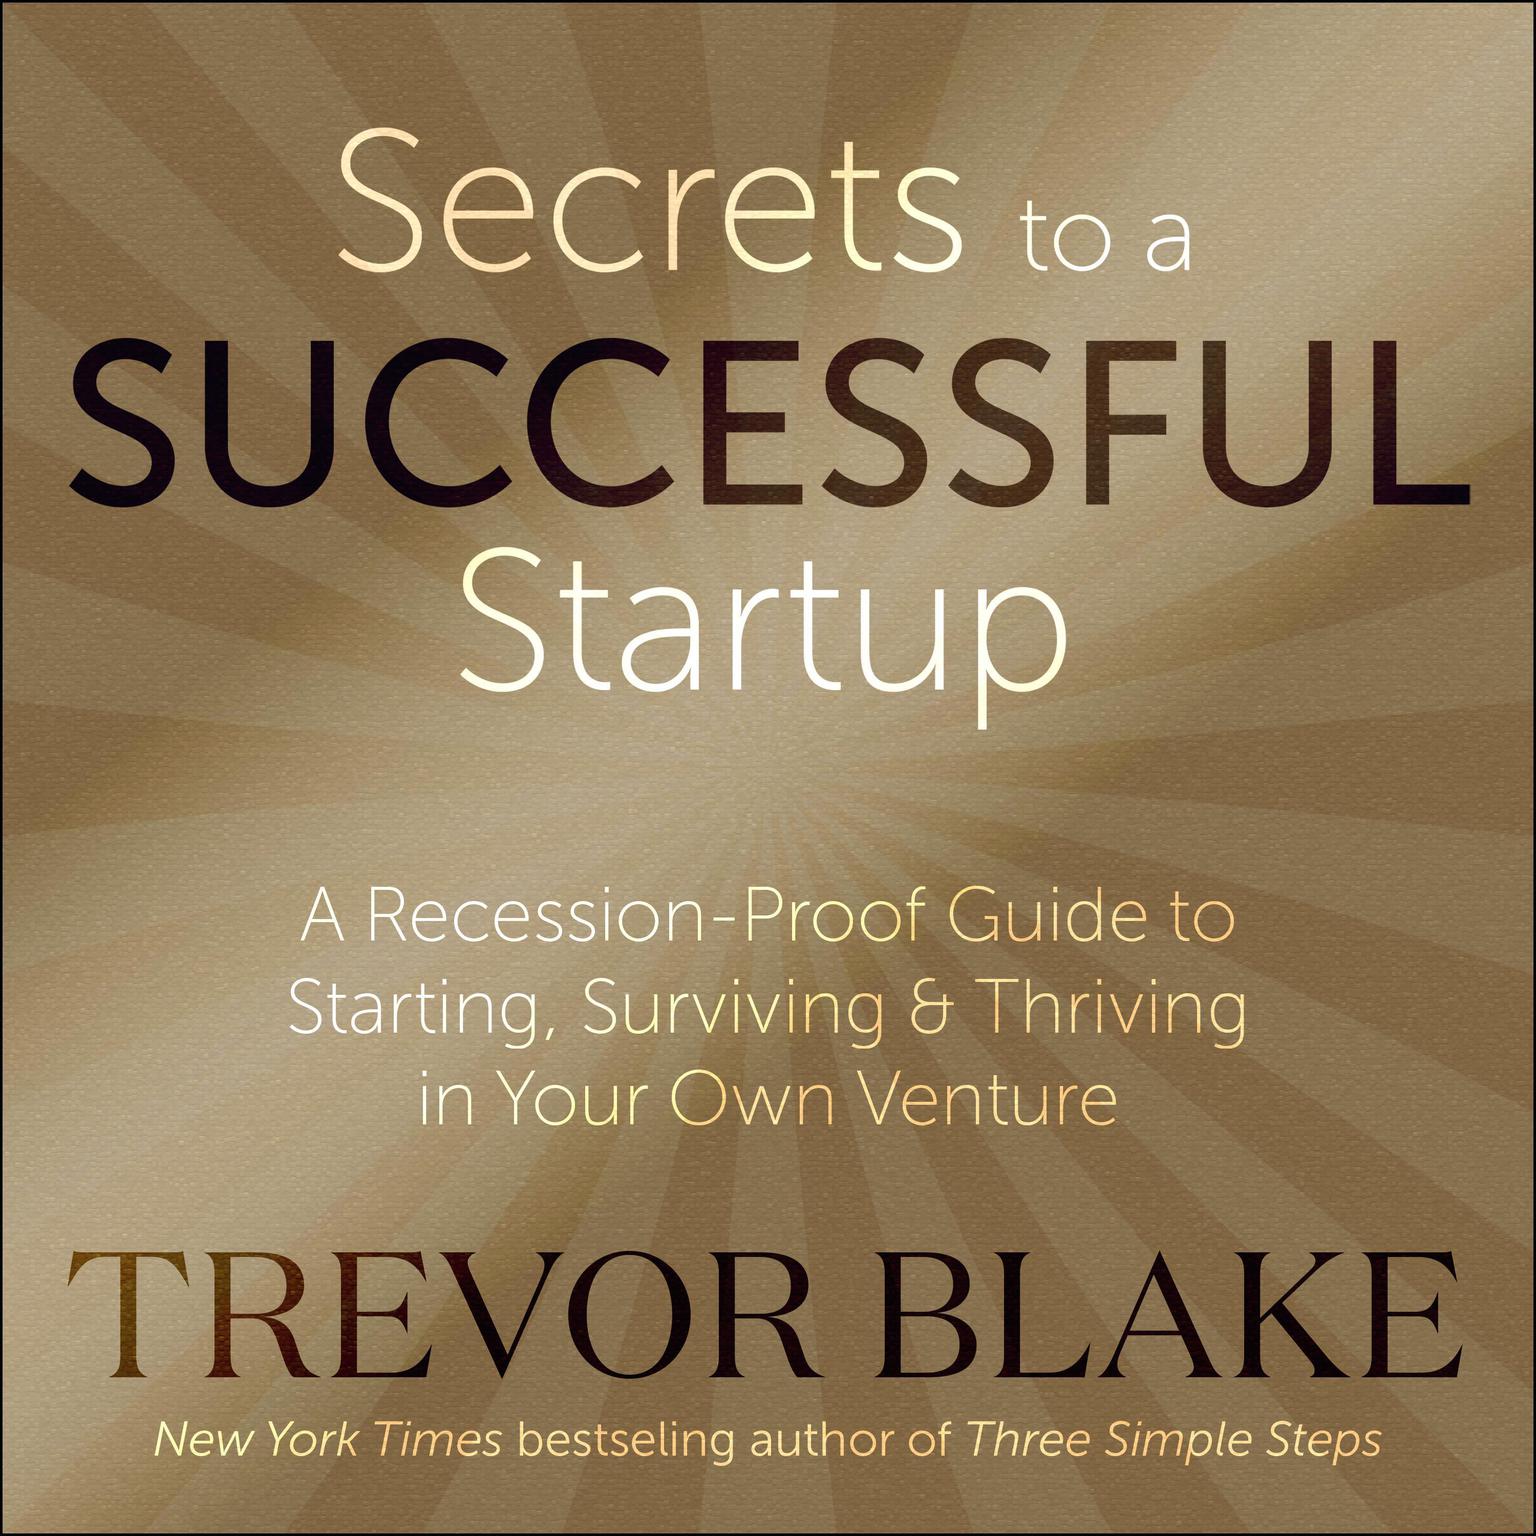 Secrets to a Successful Startup: A Recession-Proof Guide to Starting, Surviving & Thriving in Your Own Venture Audiobook, by Trevor Blake